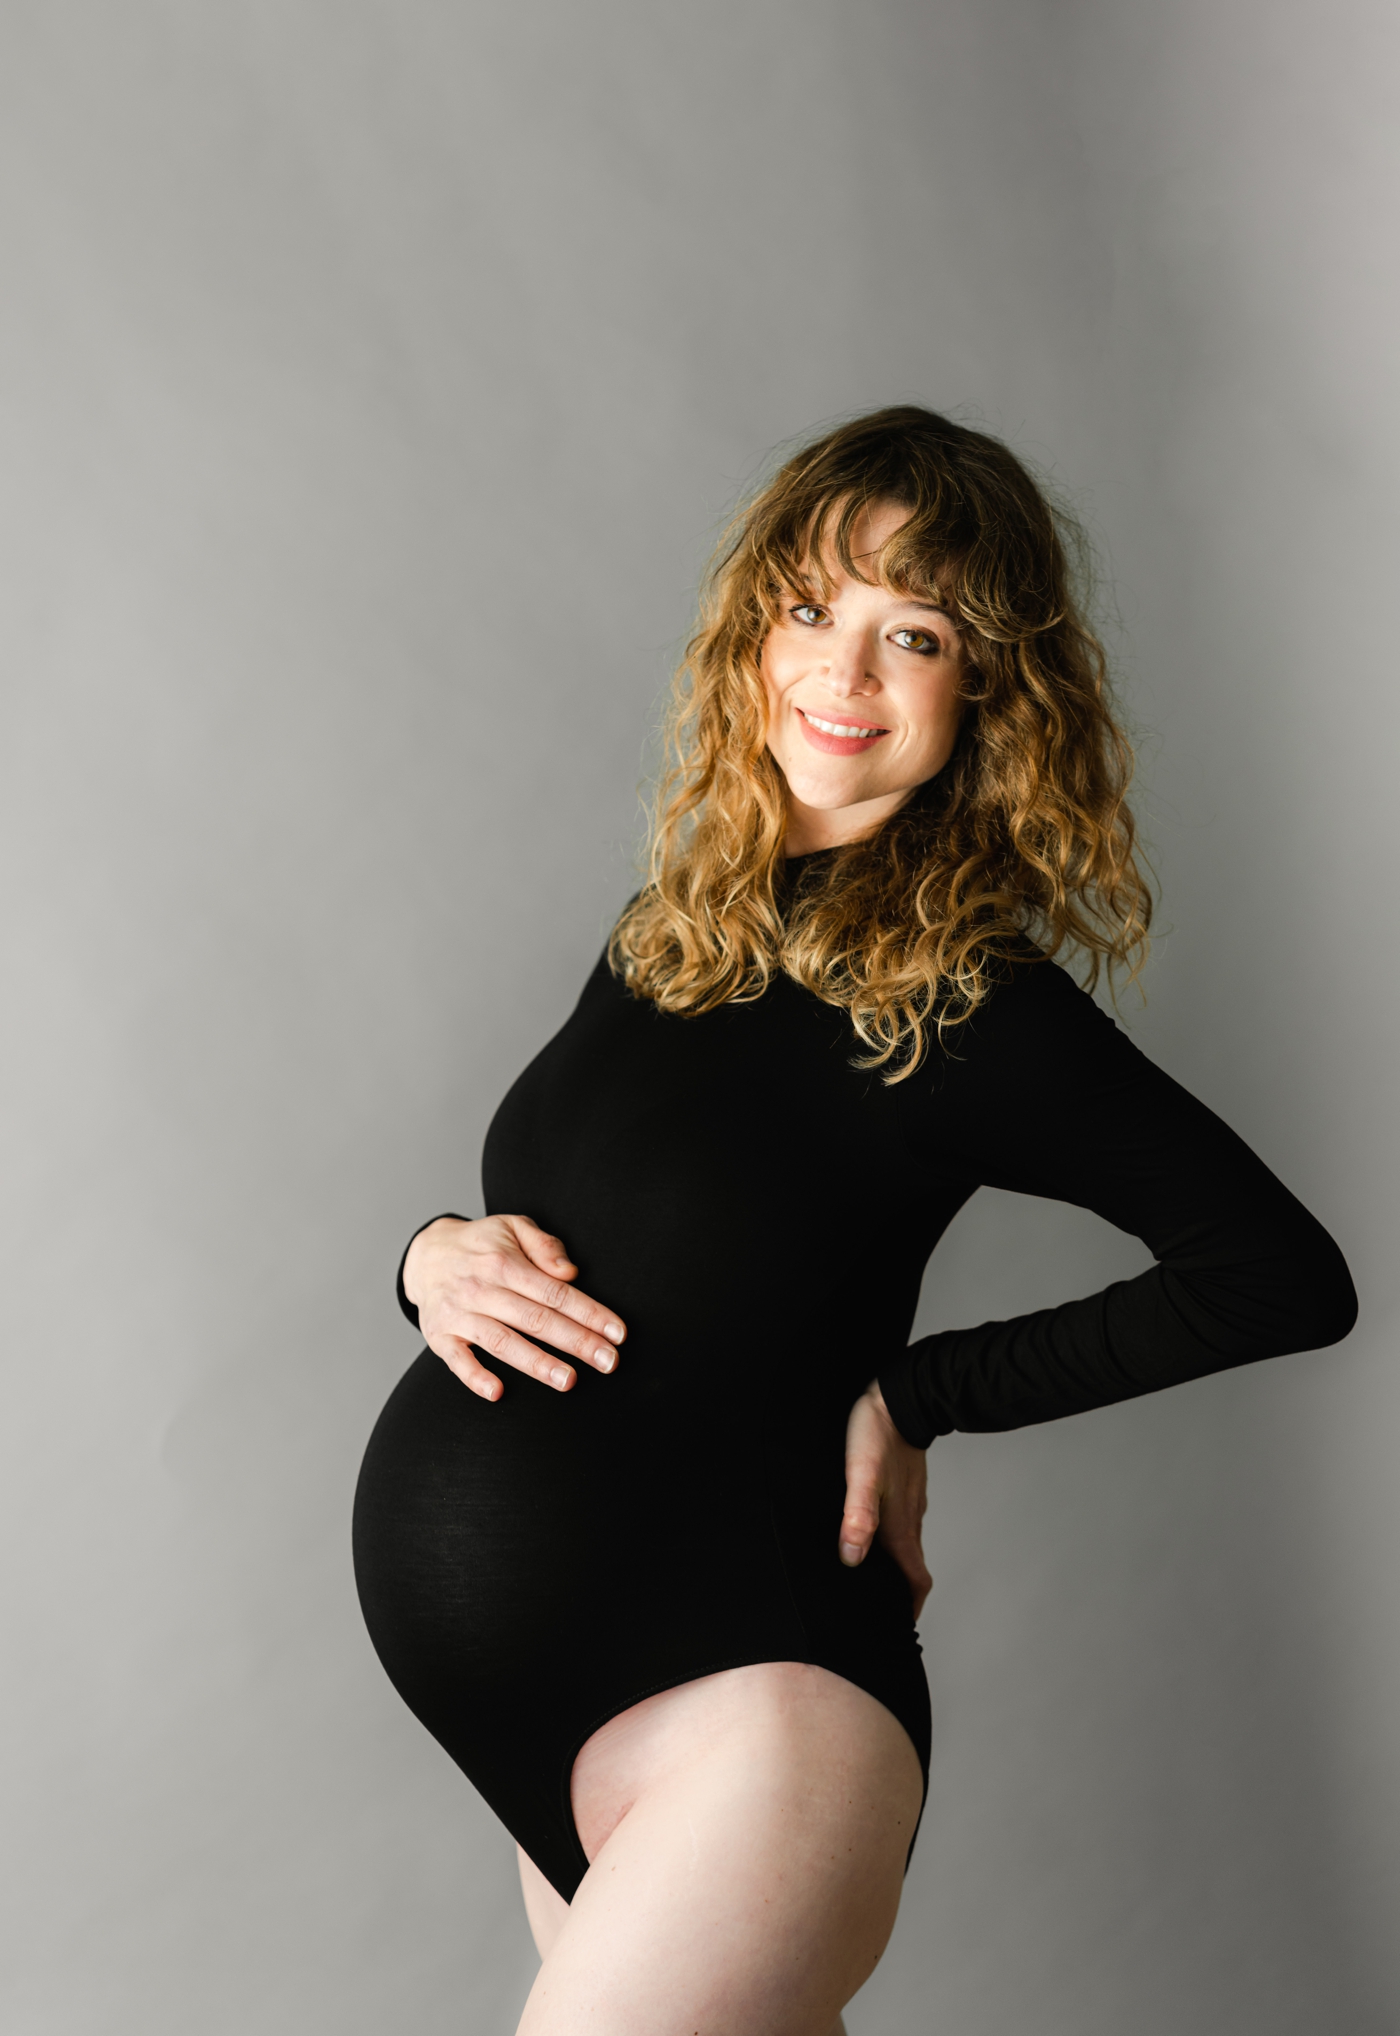 Dancing-inspired maternity session with mom in black leotard. Photo by Asheville Maternity Photographer, Lauren Sosler Photography.